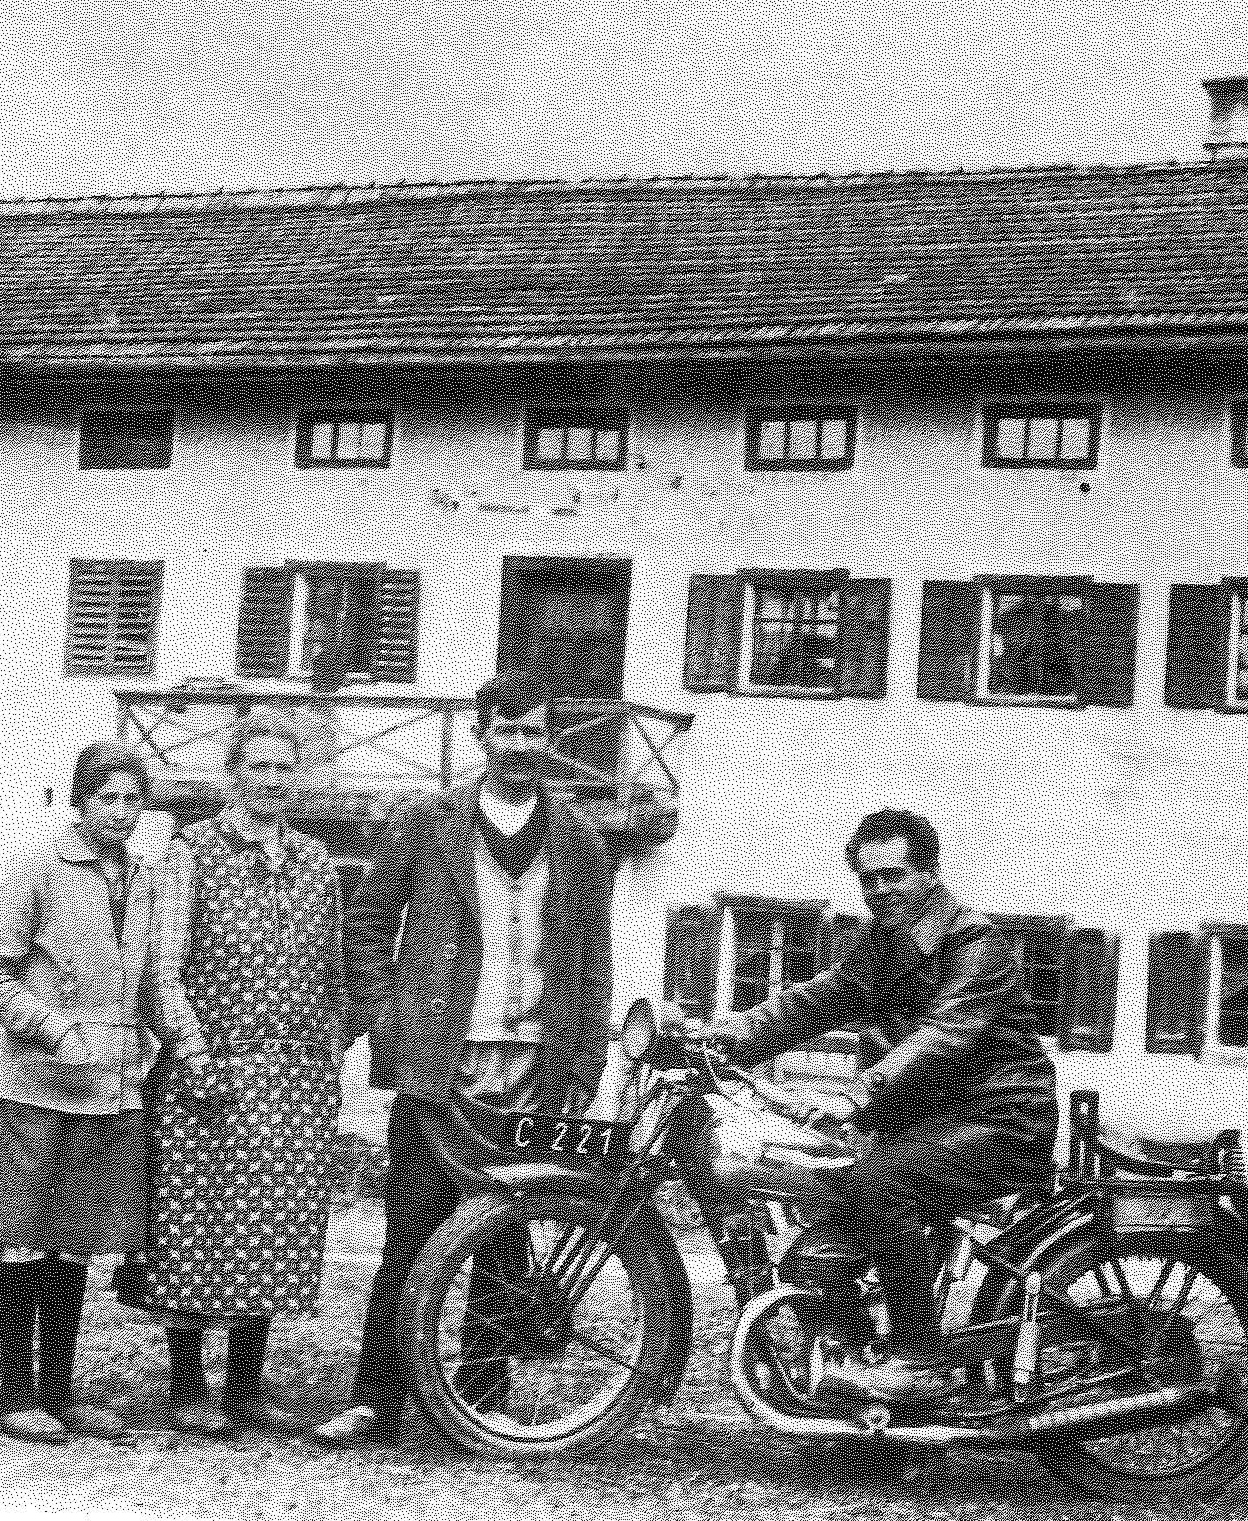 Franz Jagerstatter poses on his motorcycle. From right to left: Franz Jagerstatter; his stepfather, Heinrich Jagerstatter; his mother, Rosalia Jagerstatter; and Aloisia Sommerauer, Franz’s cousin and foster sister. /Styria Verlag. Used with permission.